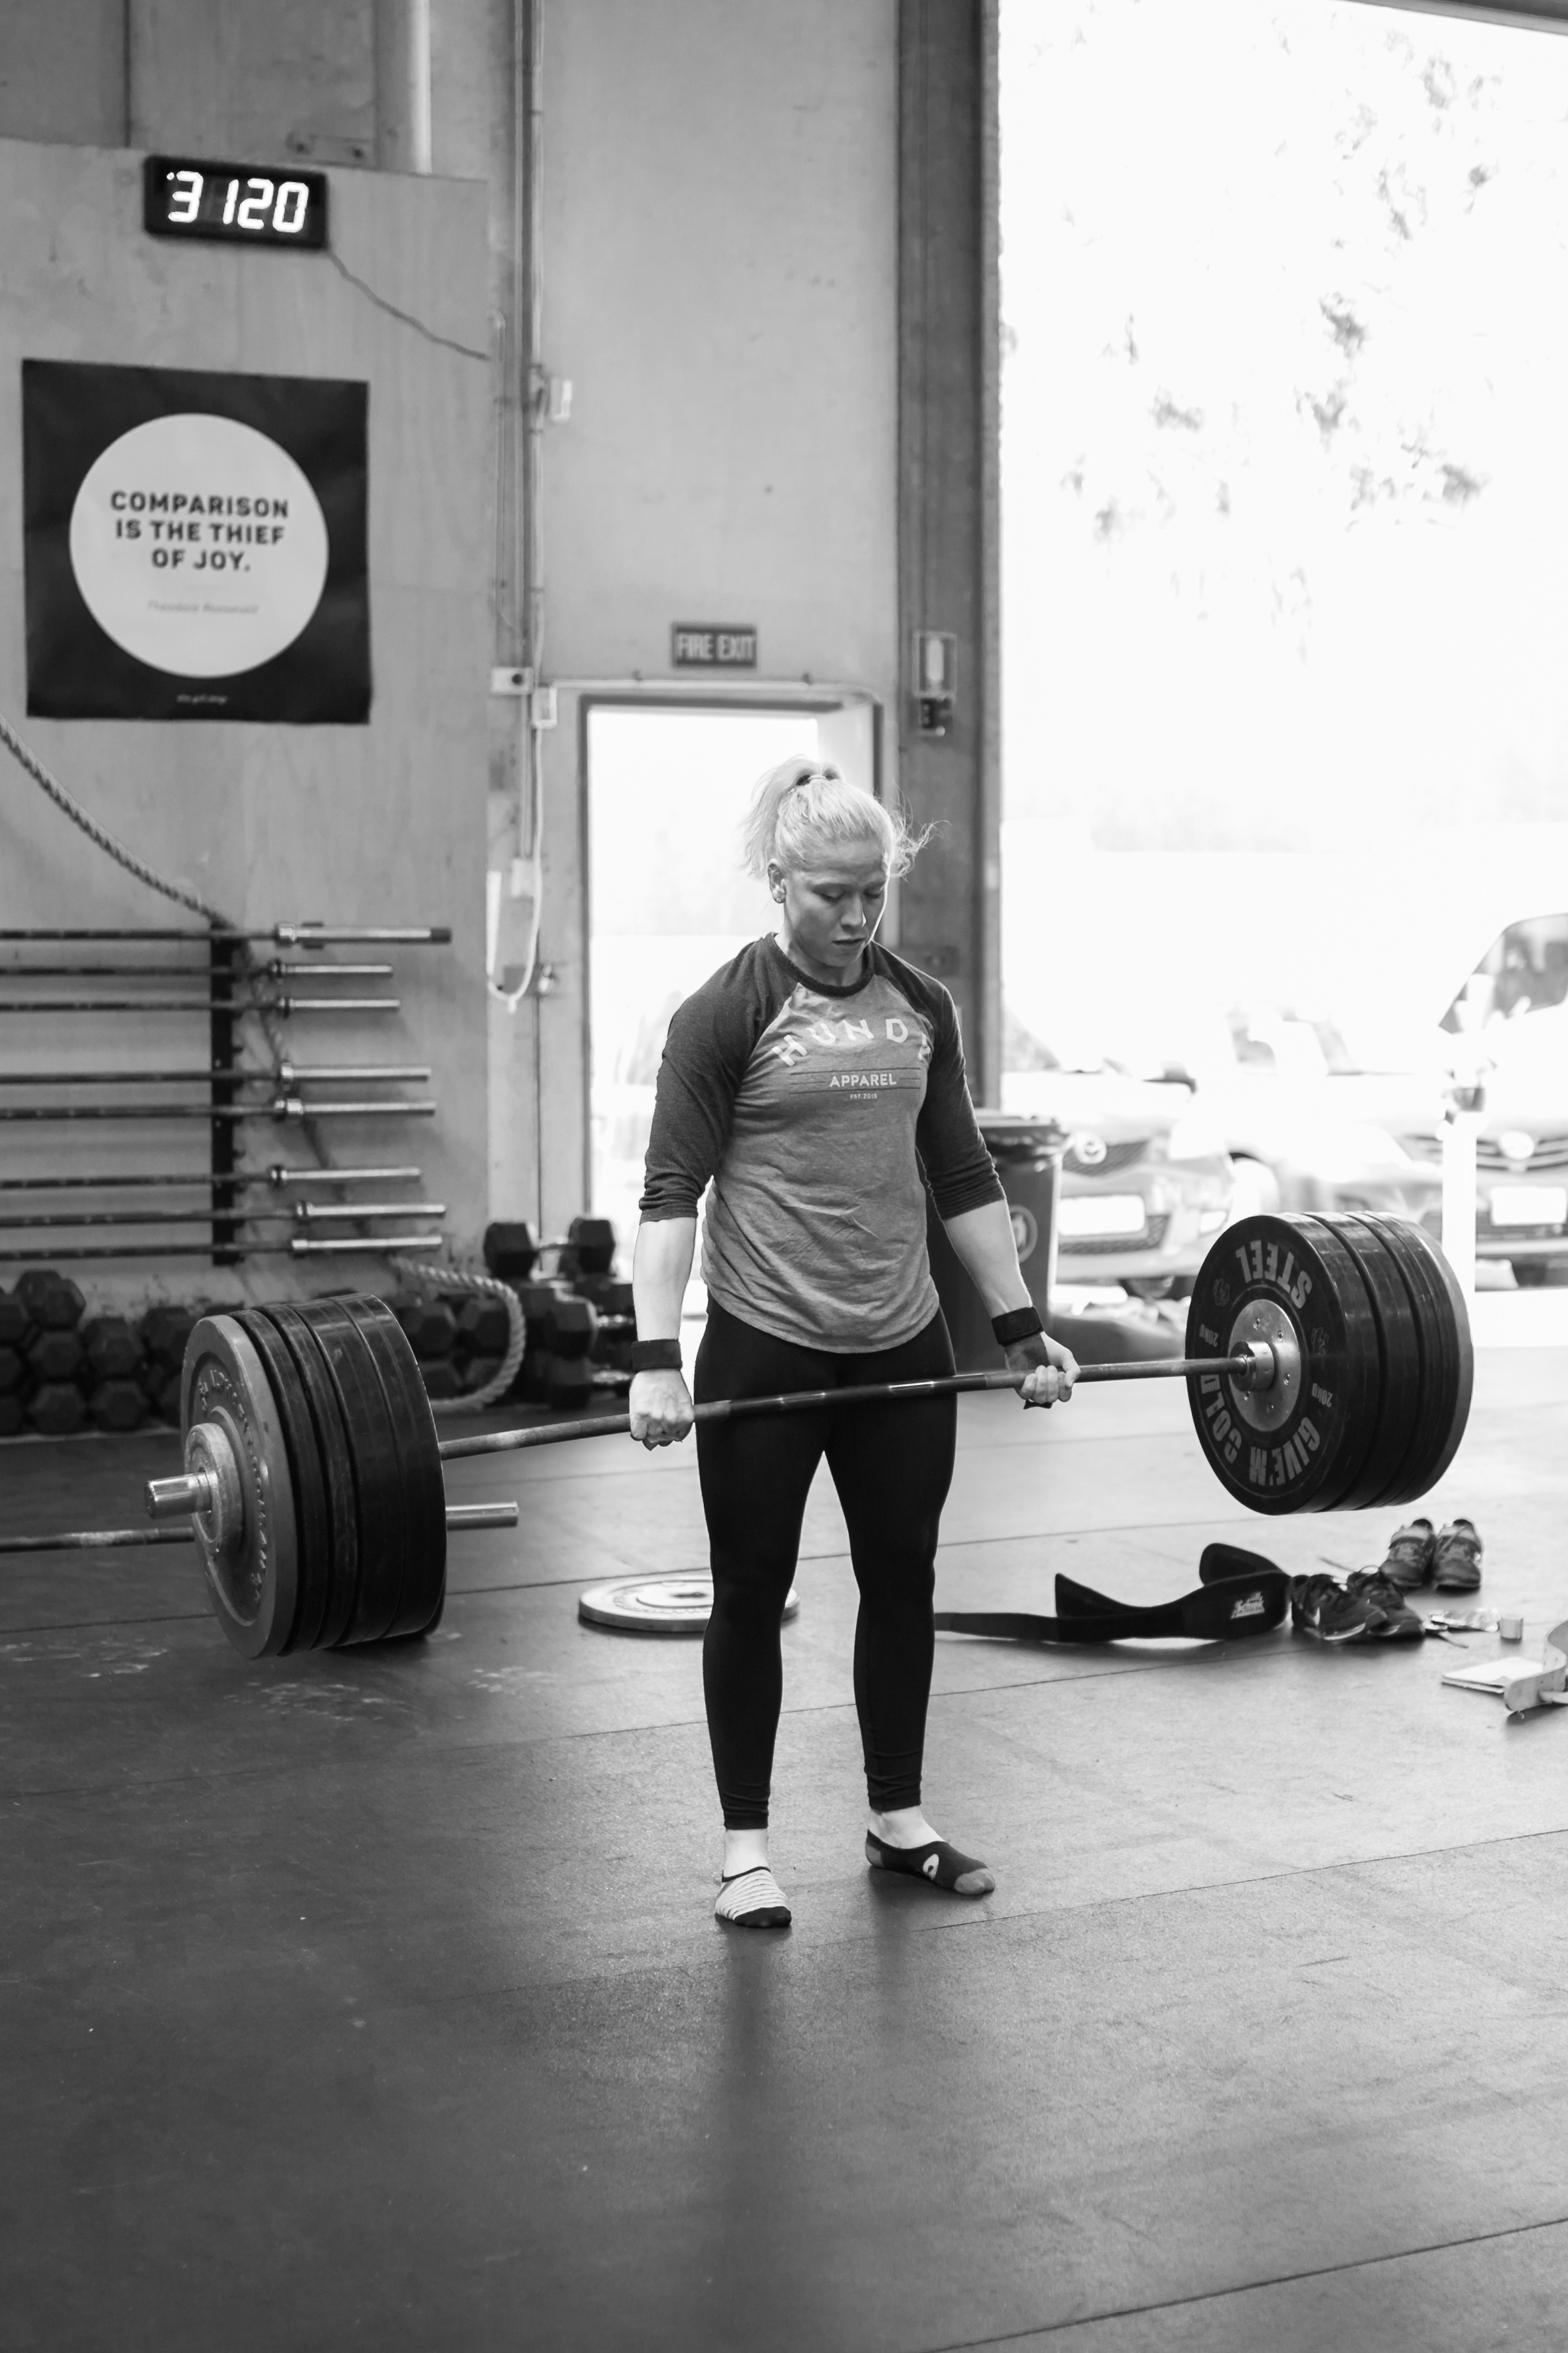 You don’t get stronger from missing lifts – the difference between a training max and a 1RM